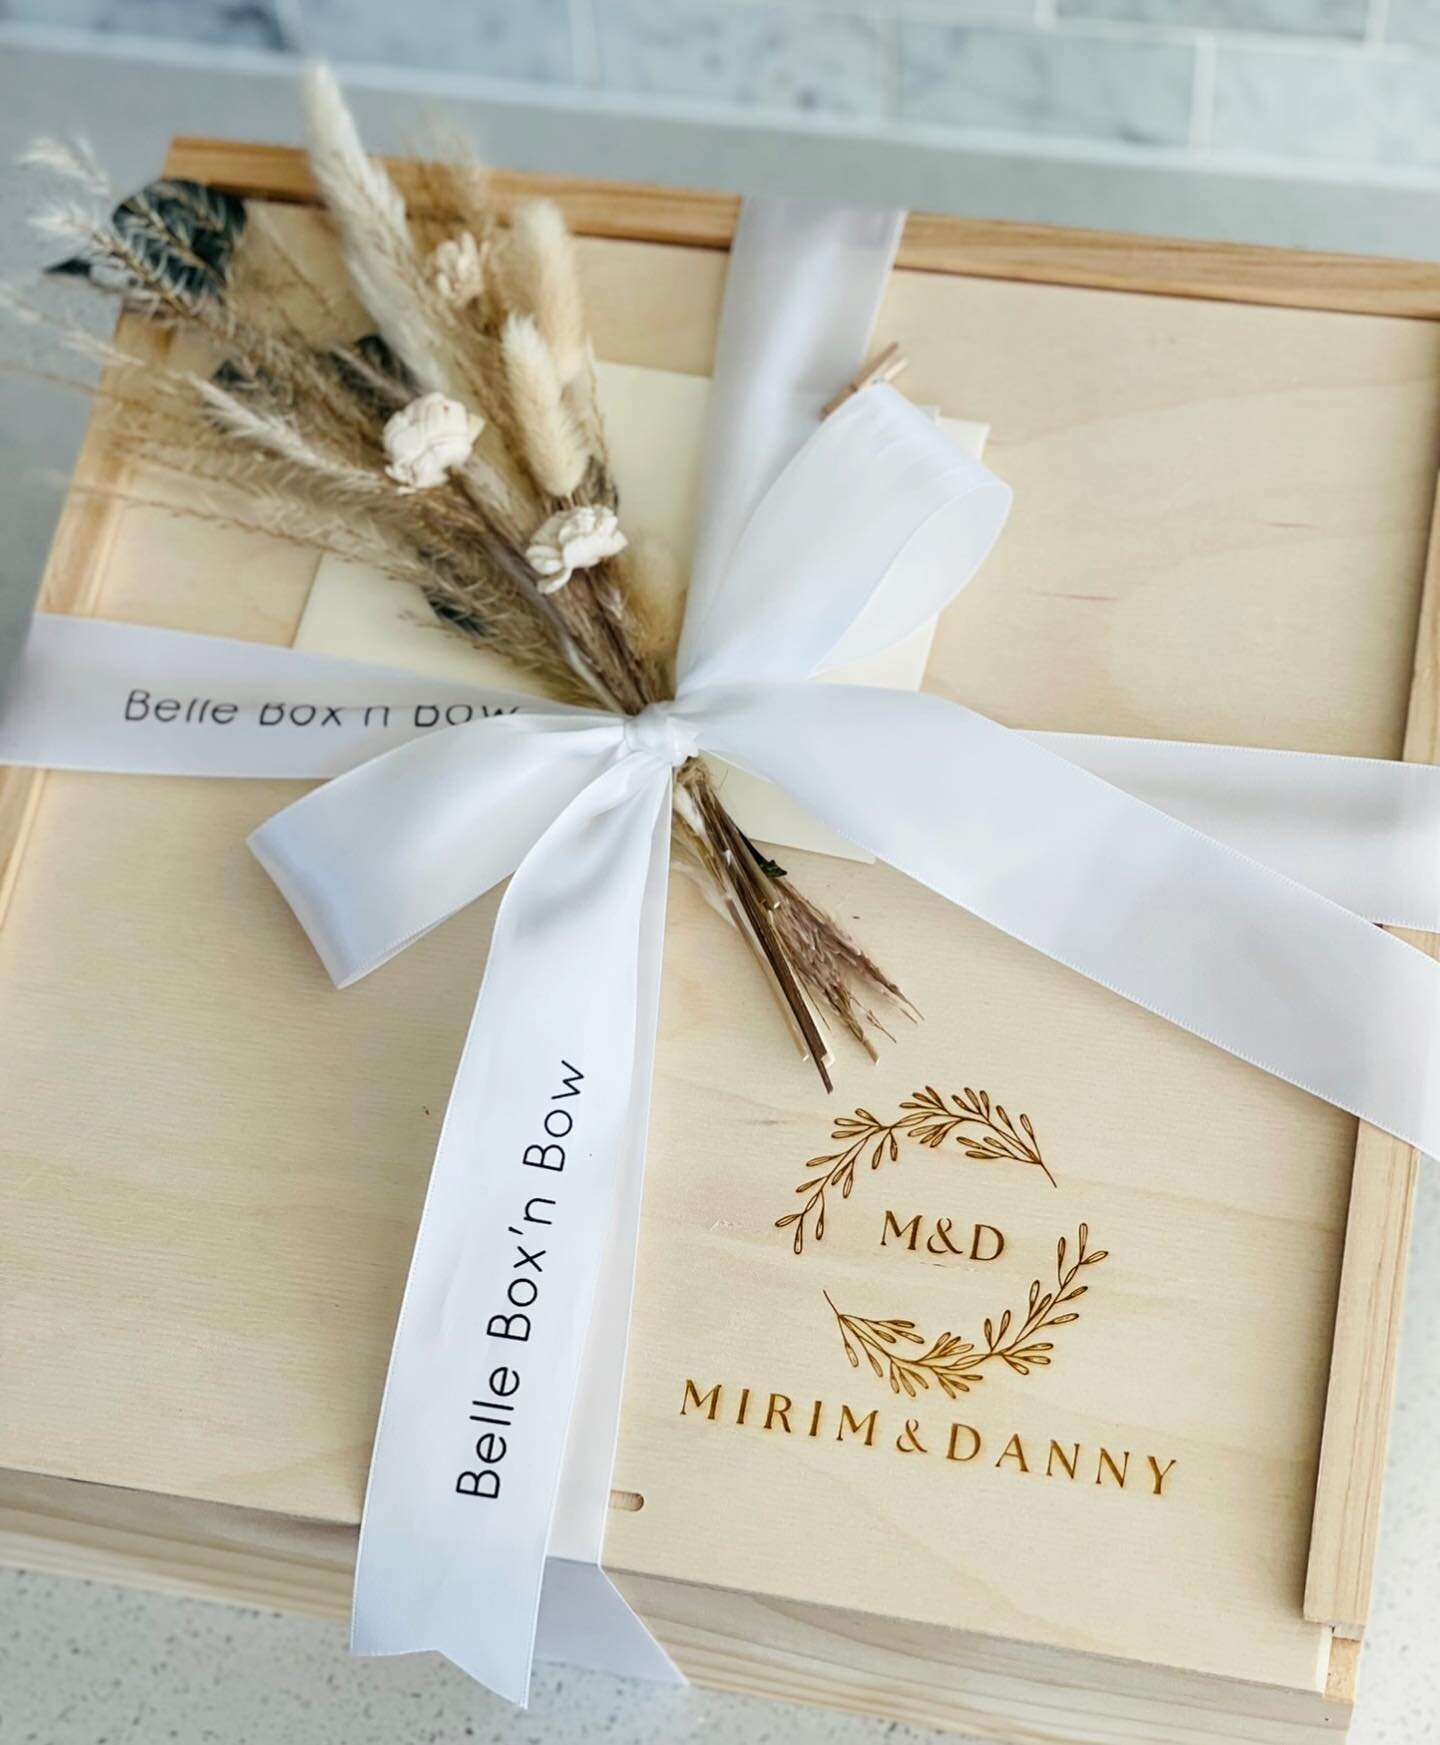 When you personally customize each present you can be sure that you're creating unique gifts for everyone on your list.🎁💝

#personalizedgifts #giftboxes #giftideas #curatedgifts #vancouvergifting #coquitlam #burkemountain #weddinggiftsidea